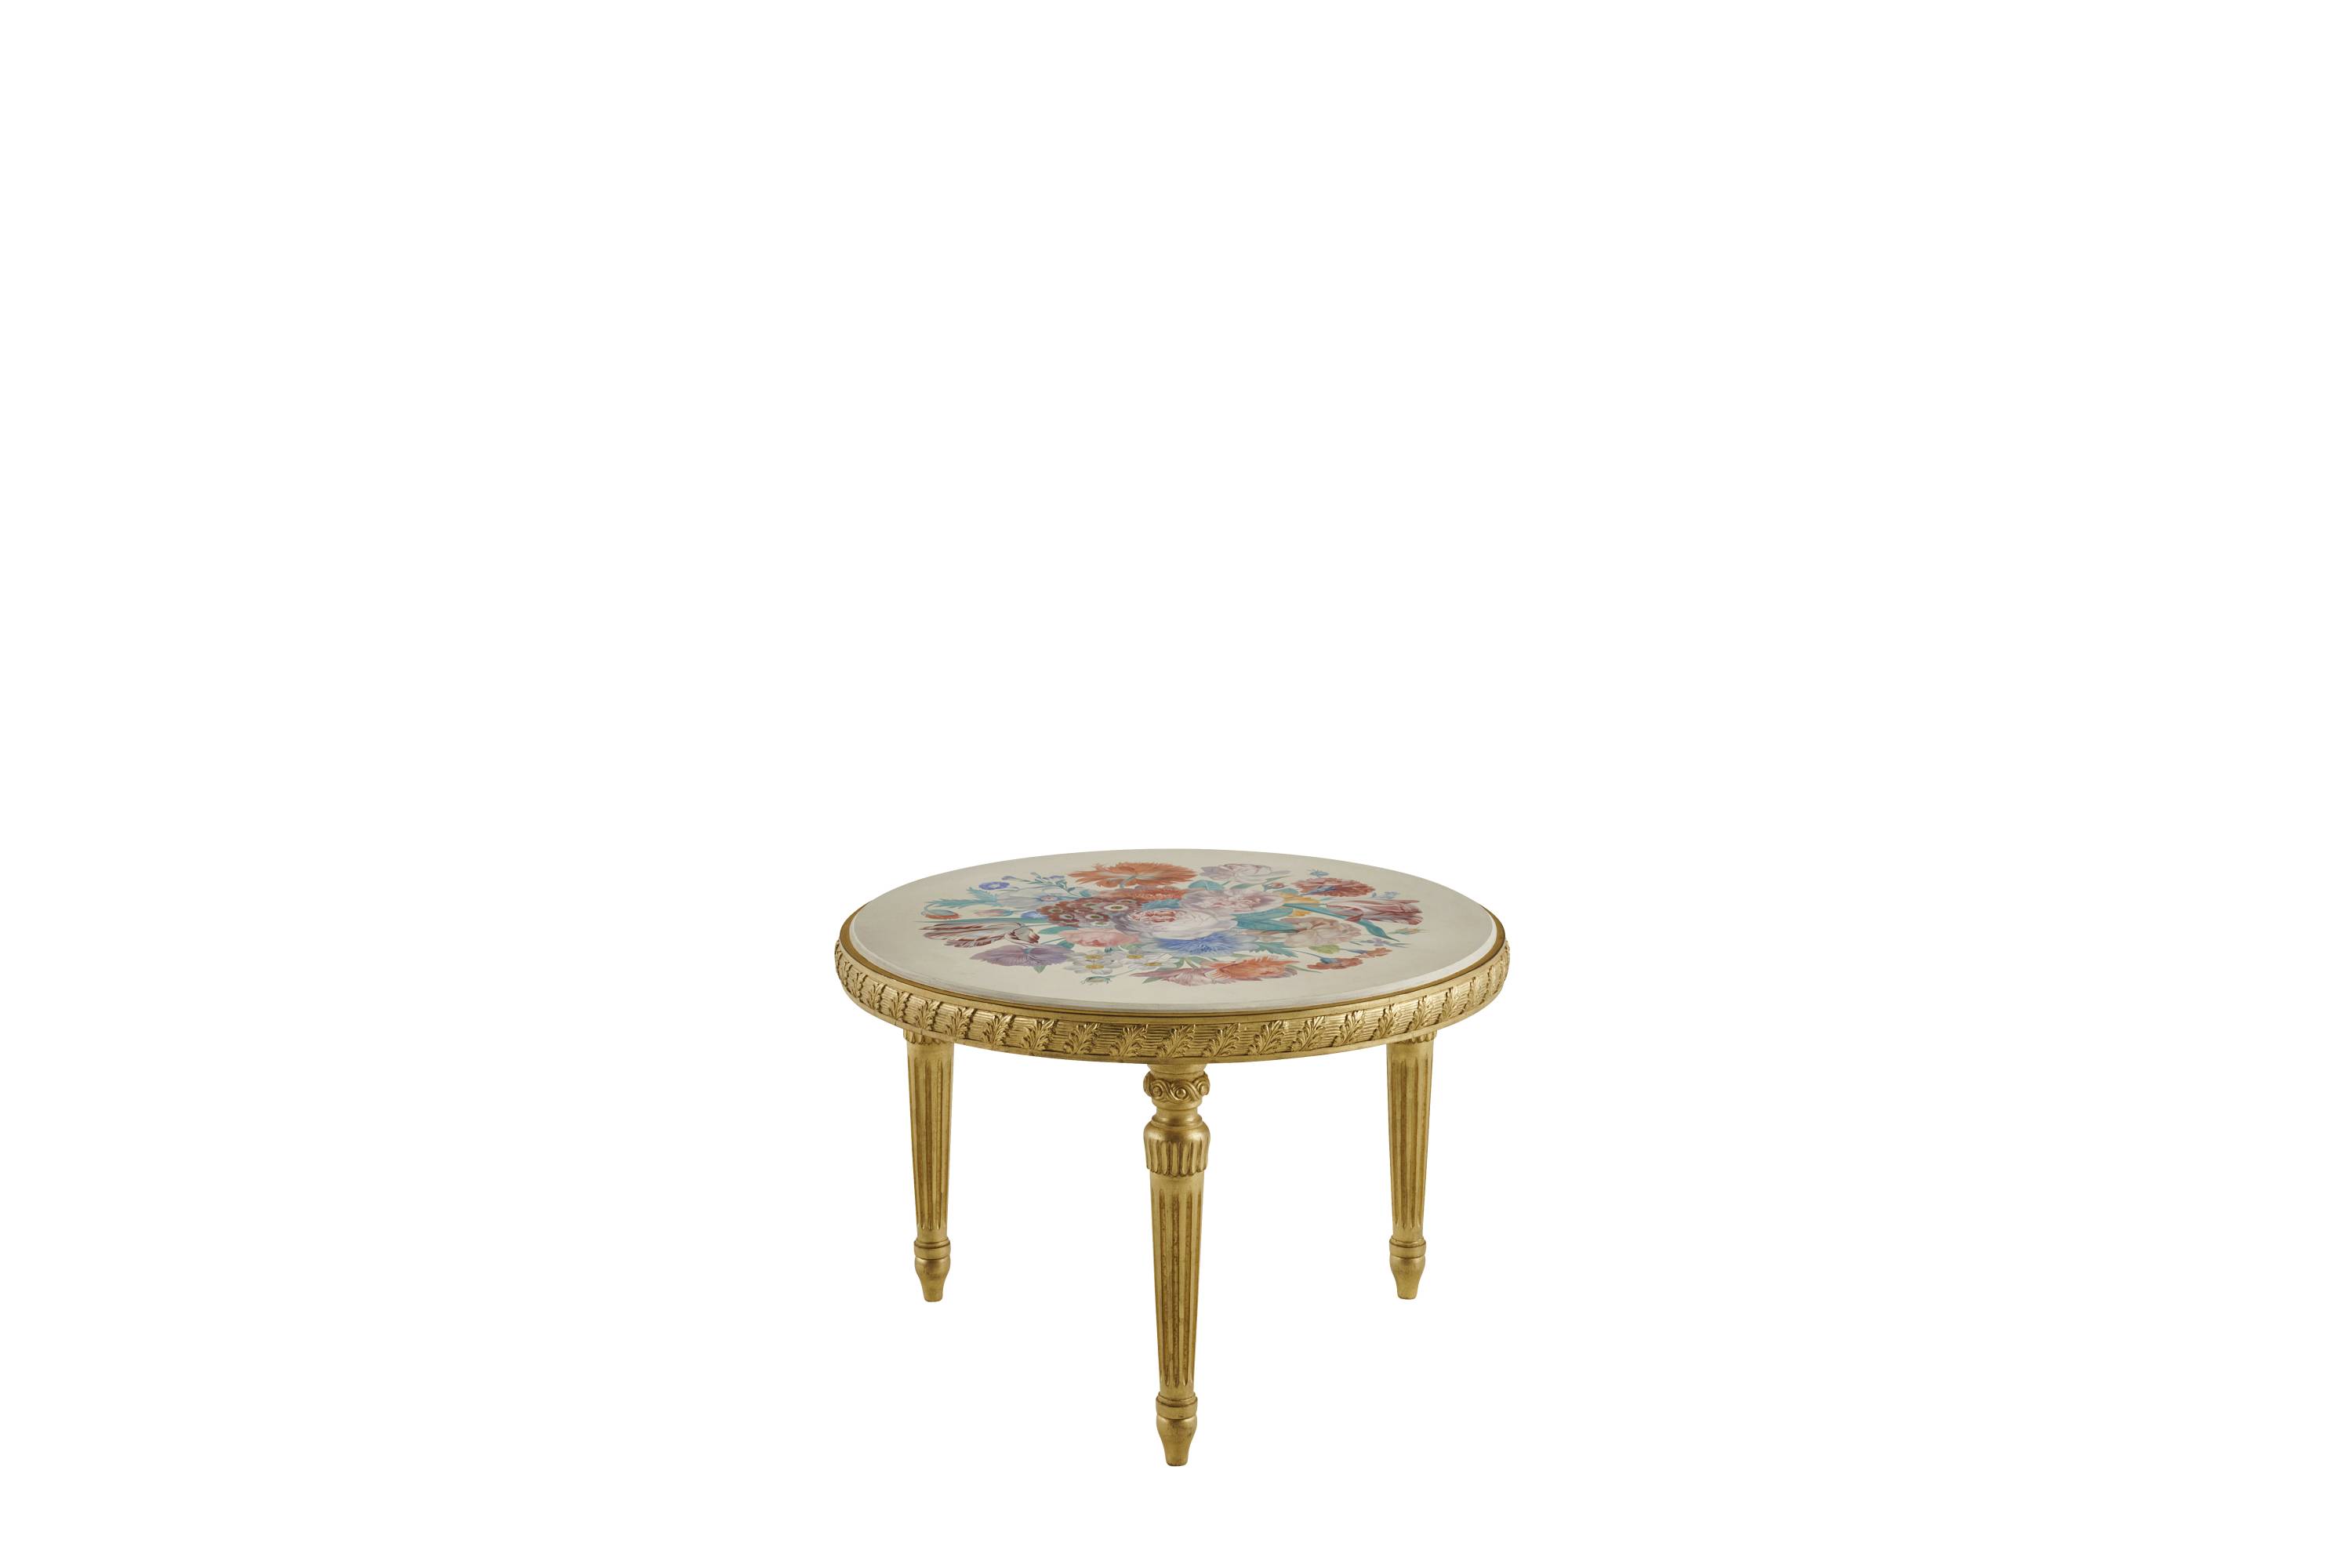 FLEUR-DE-LIS low table – Transform your space with luxury Made in Italy classic low tables of Héritage collection.